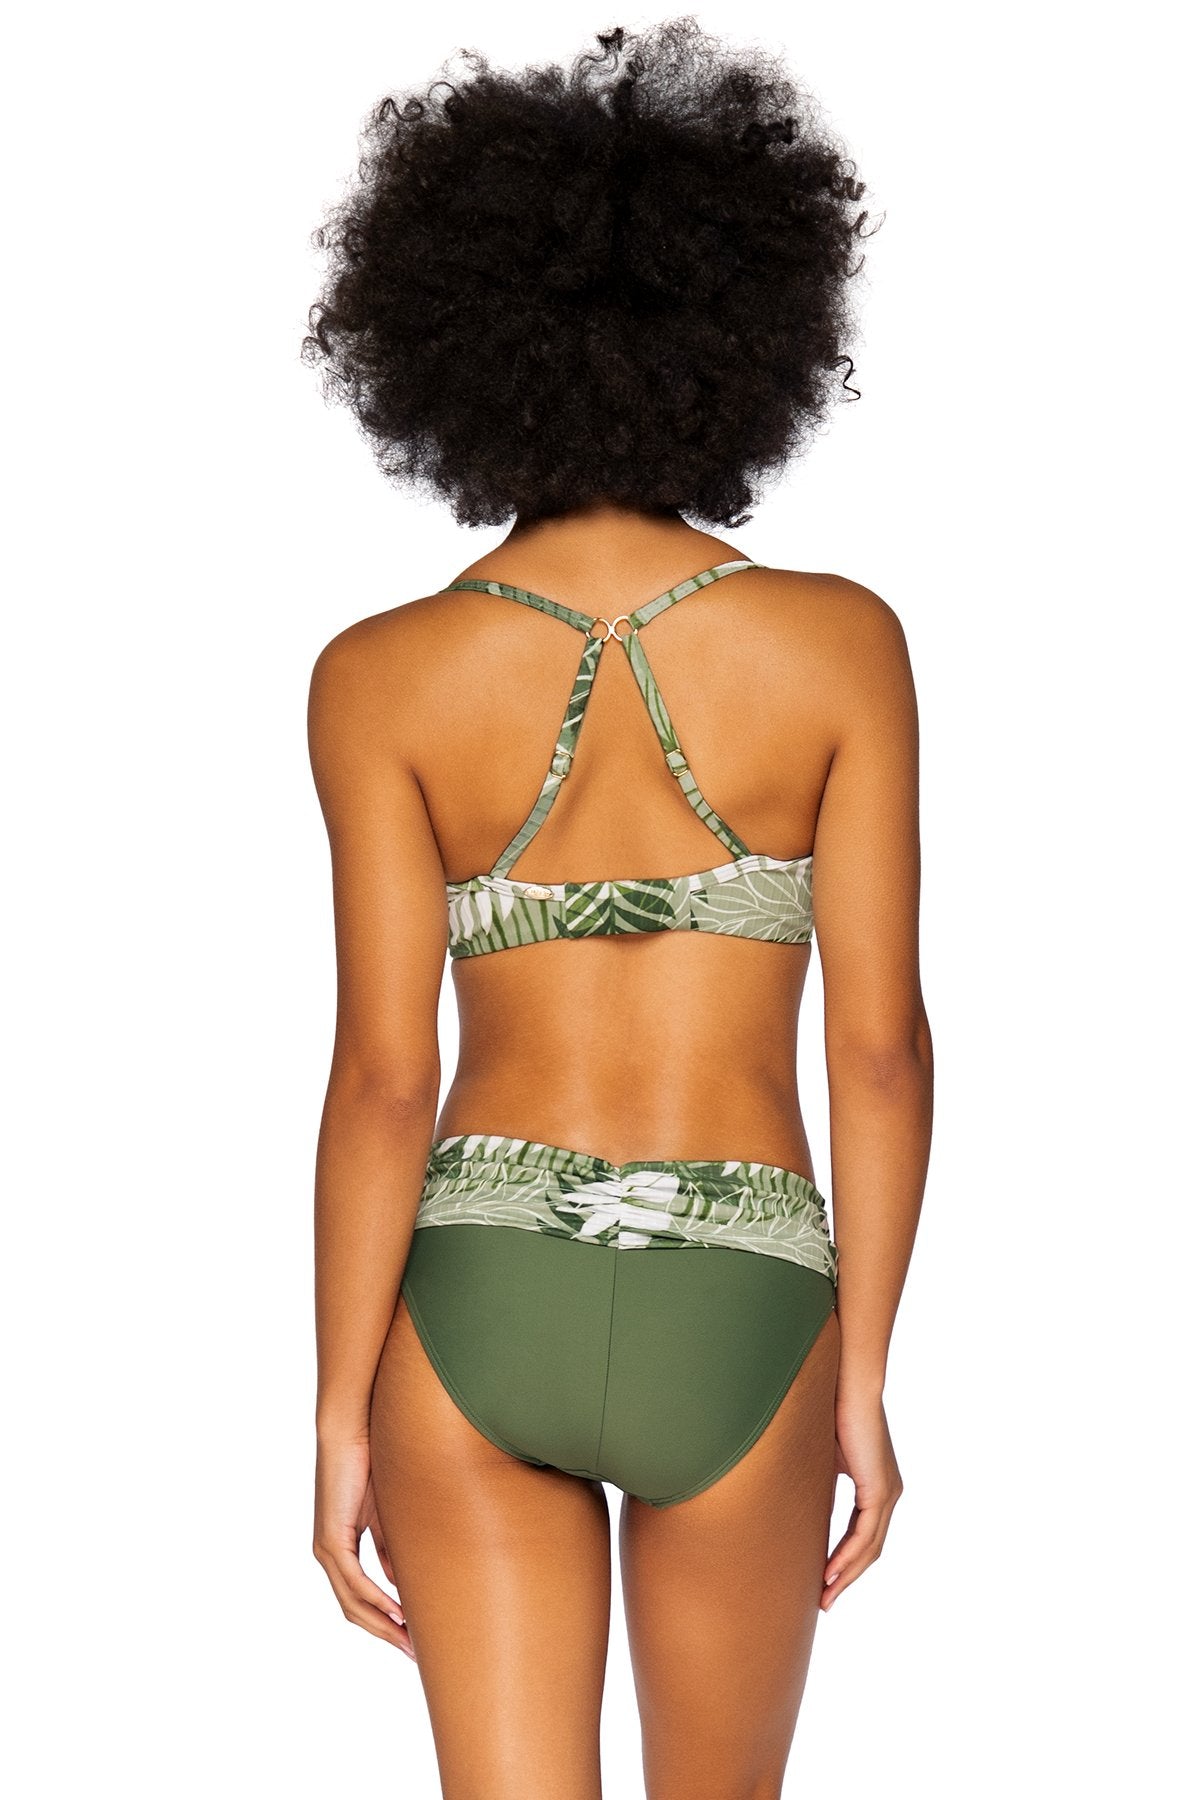 Sunsets Palm Grove Crossroads Underwire